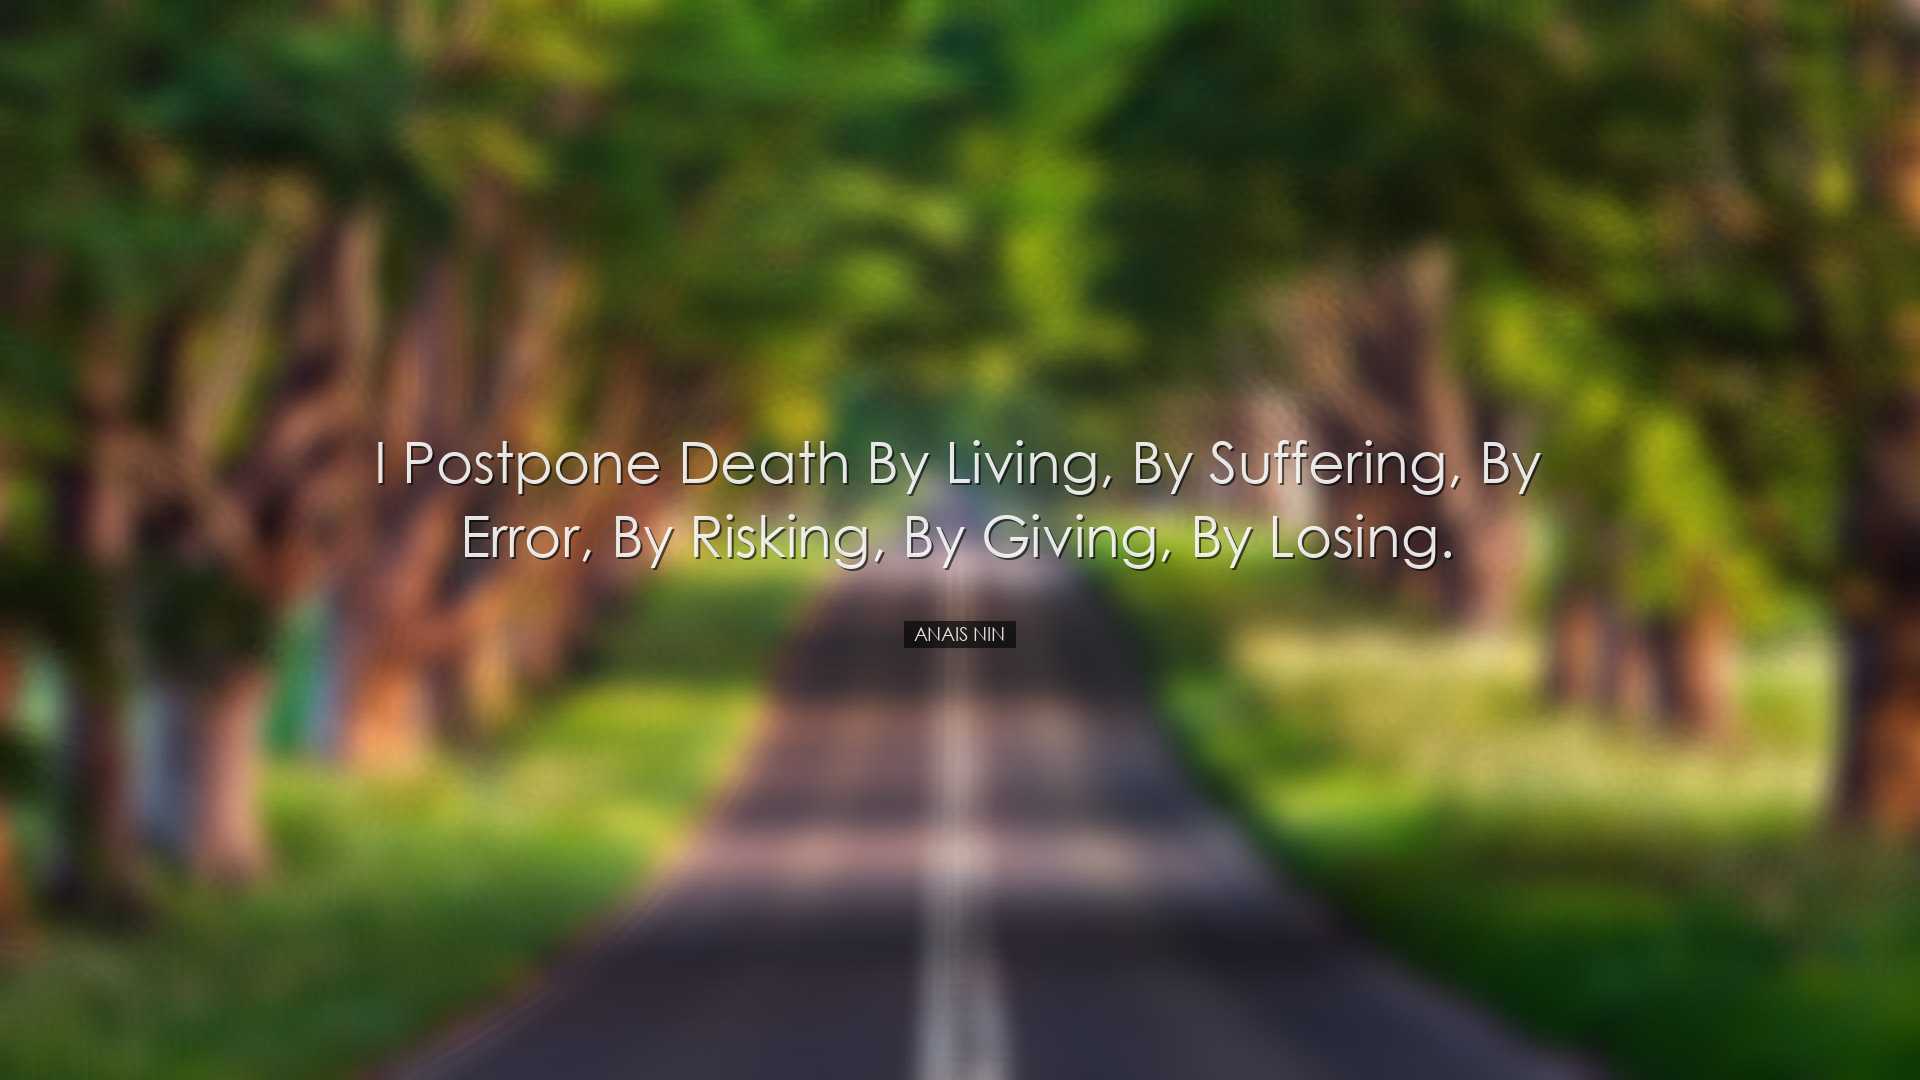 I postpone death by living, by suffering, by error, by risking, by